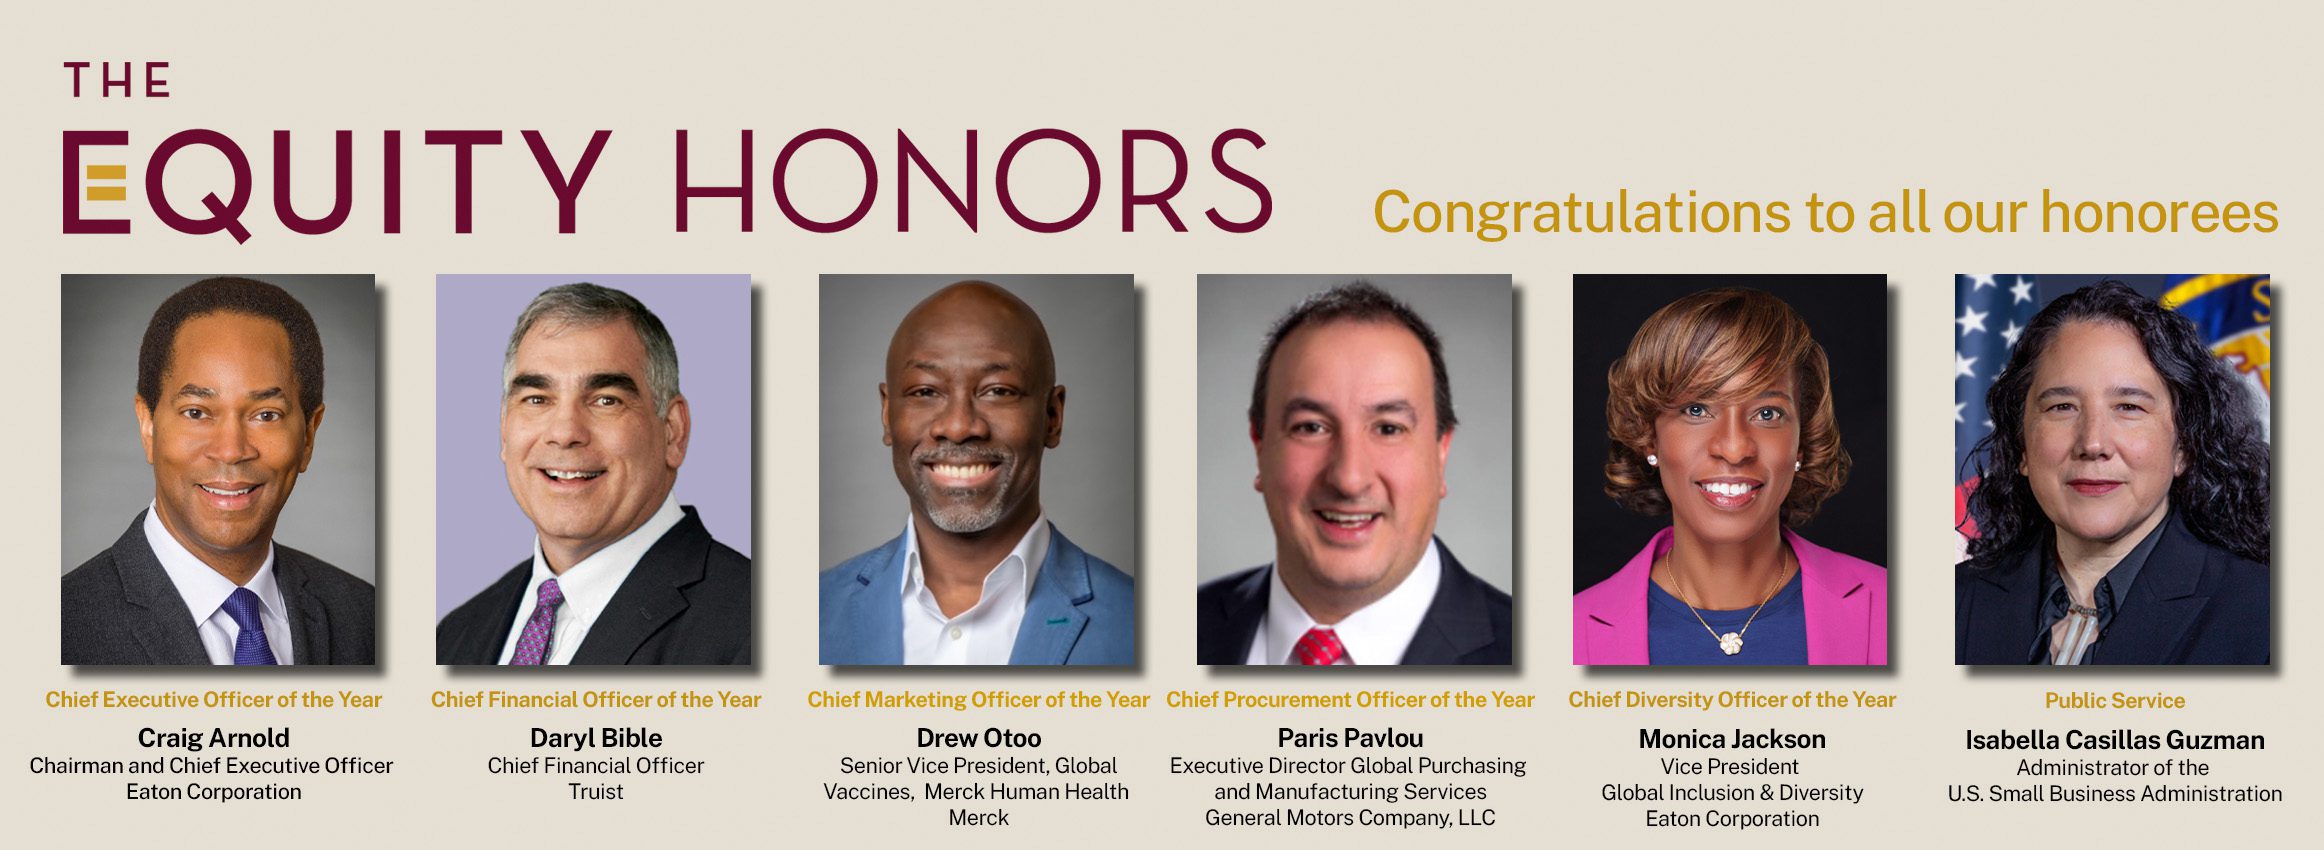 2022 Equity Honors Honorees